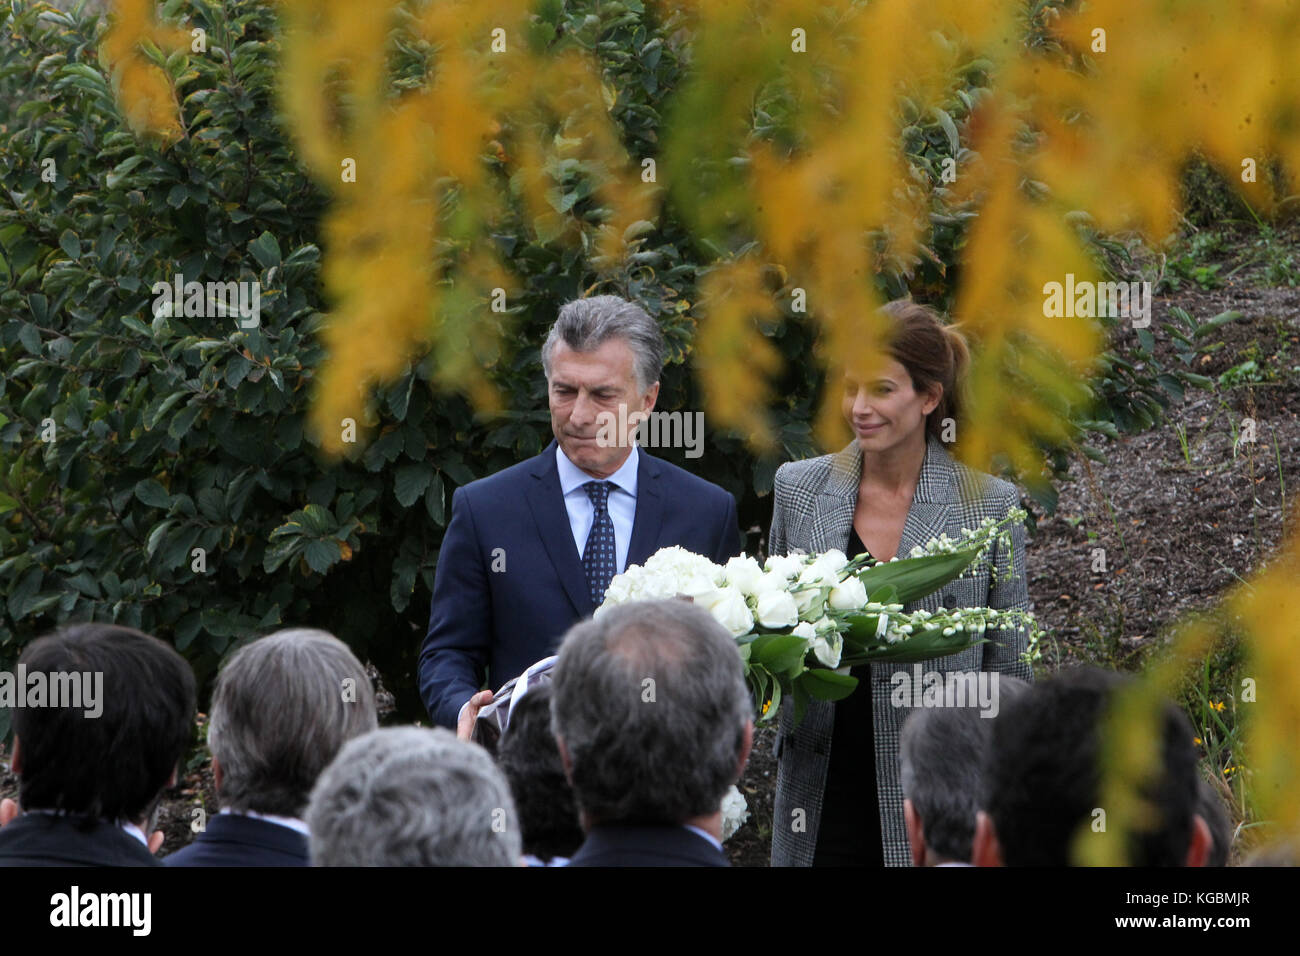 New York, NY, USA. 6th Nov, 2017. President Mauricio Macri and First Lady Juliana Awada of Argentina at a Tribute for victims of the Tribeca terrorist attack held along West Street on November 6, 2017 in New York City. Credit: Mpi43/Media Punch/Alamy Live News Stock Photo